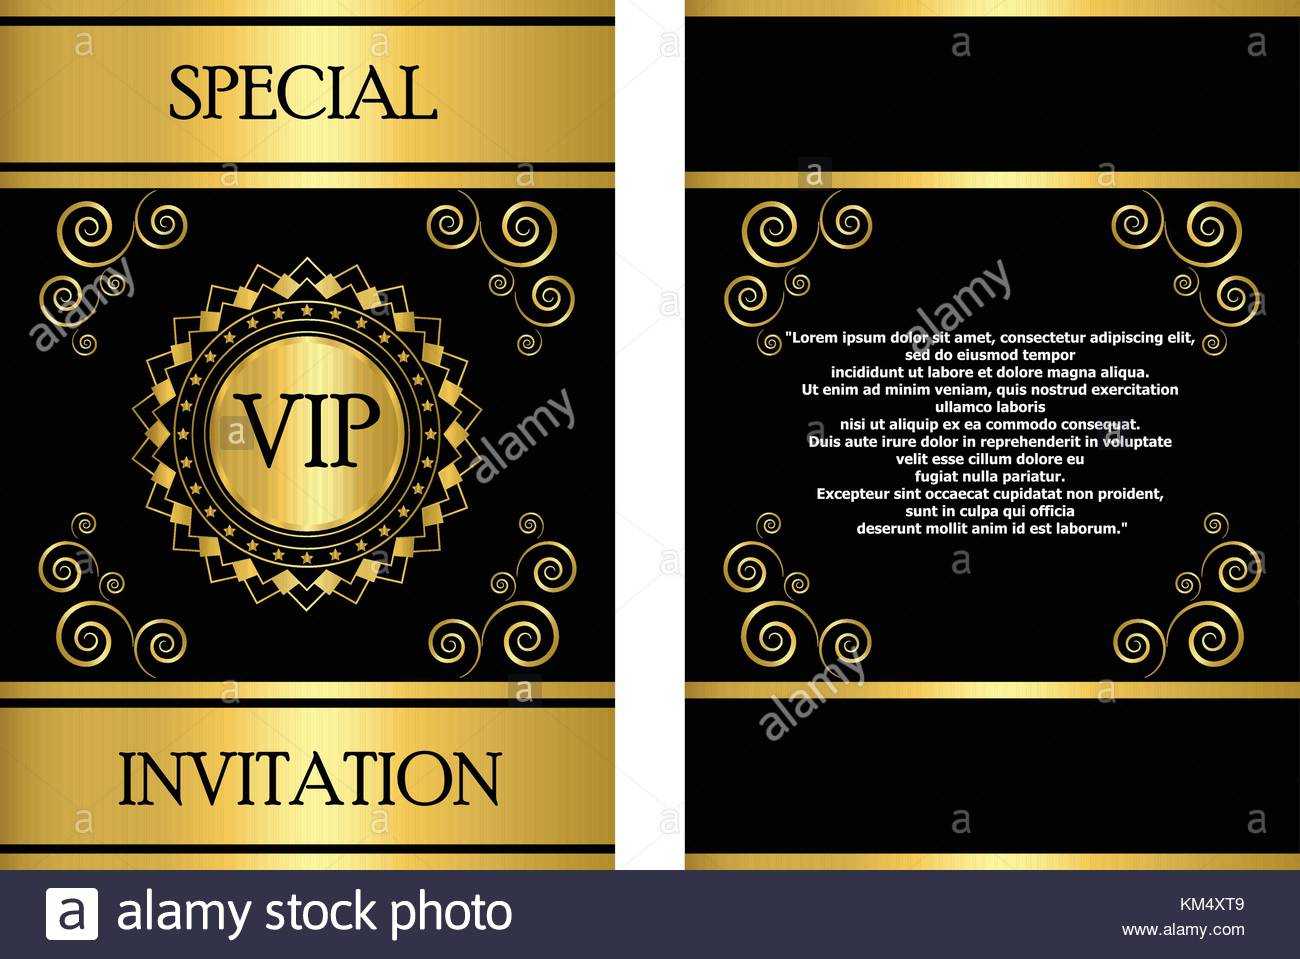 A Golden Vip Invitation Card Template That Can Be Used For Inside Event Invitation Card Template